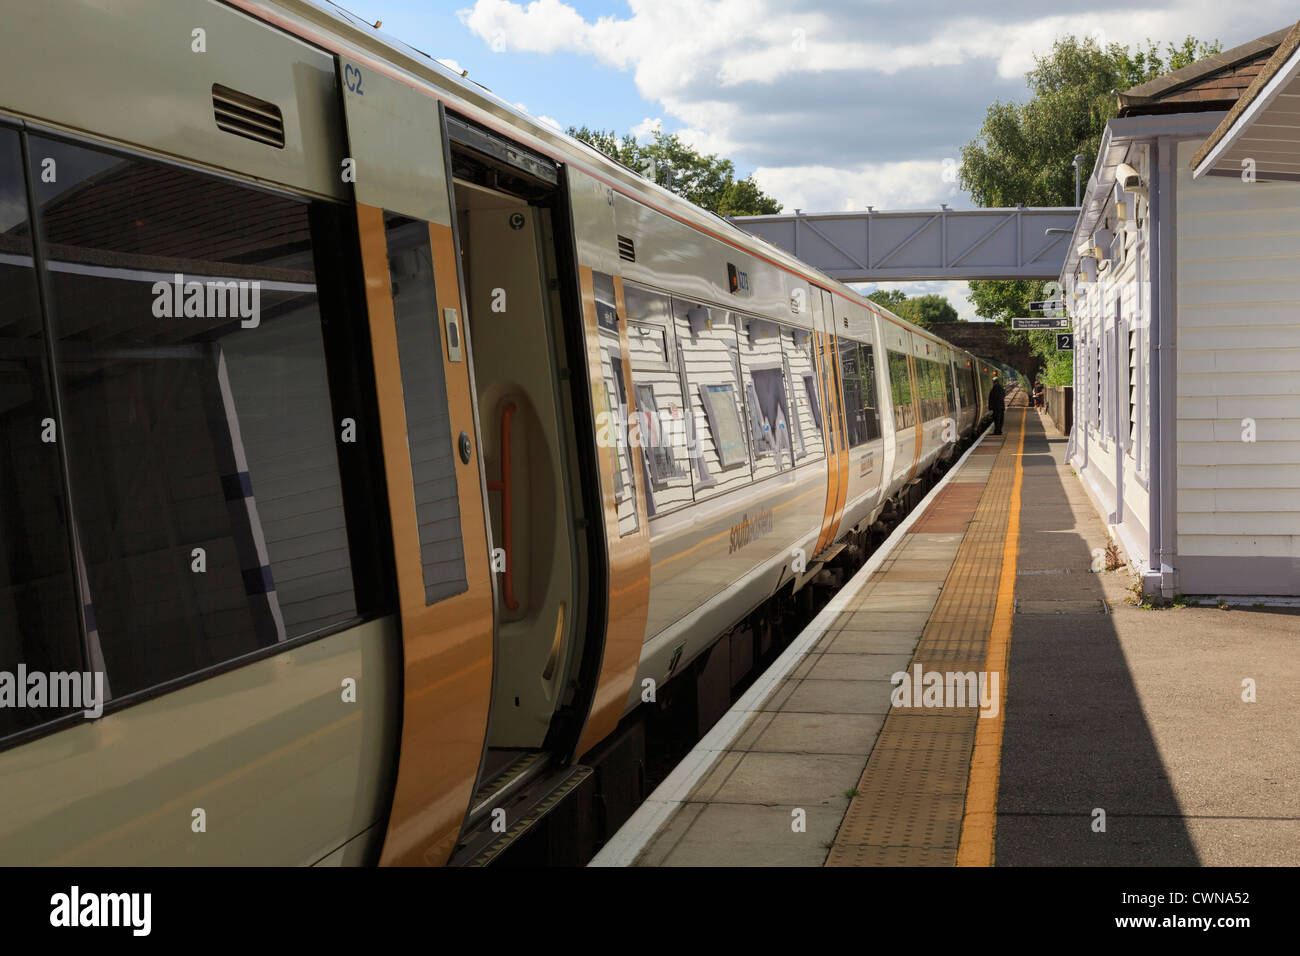 SouthEastern train with doors open stopped by platform at railway station on London to Ashford line at Pluckley Kent England UK Stock Photo